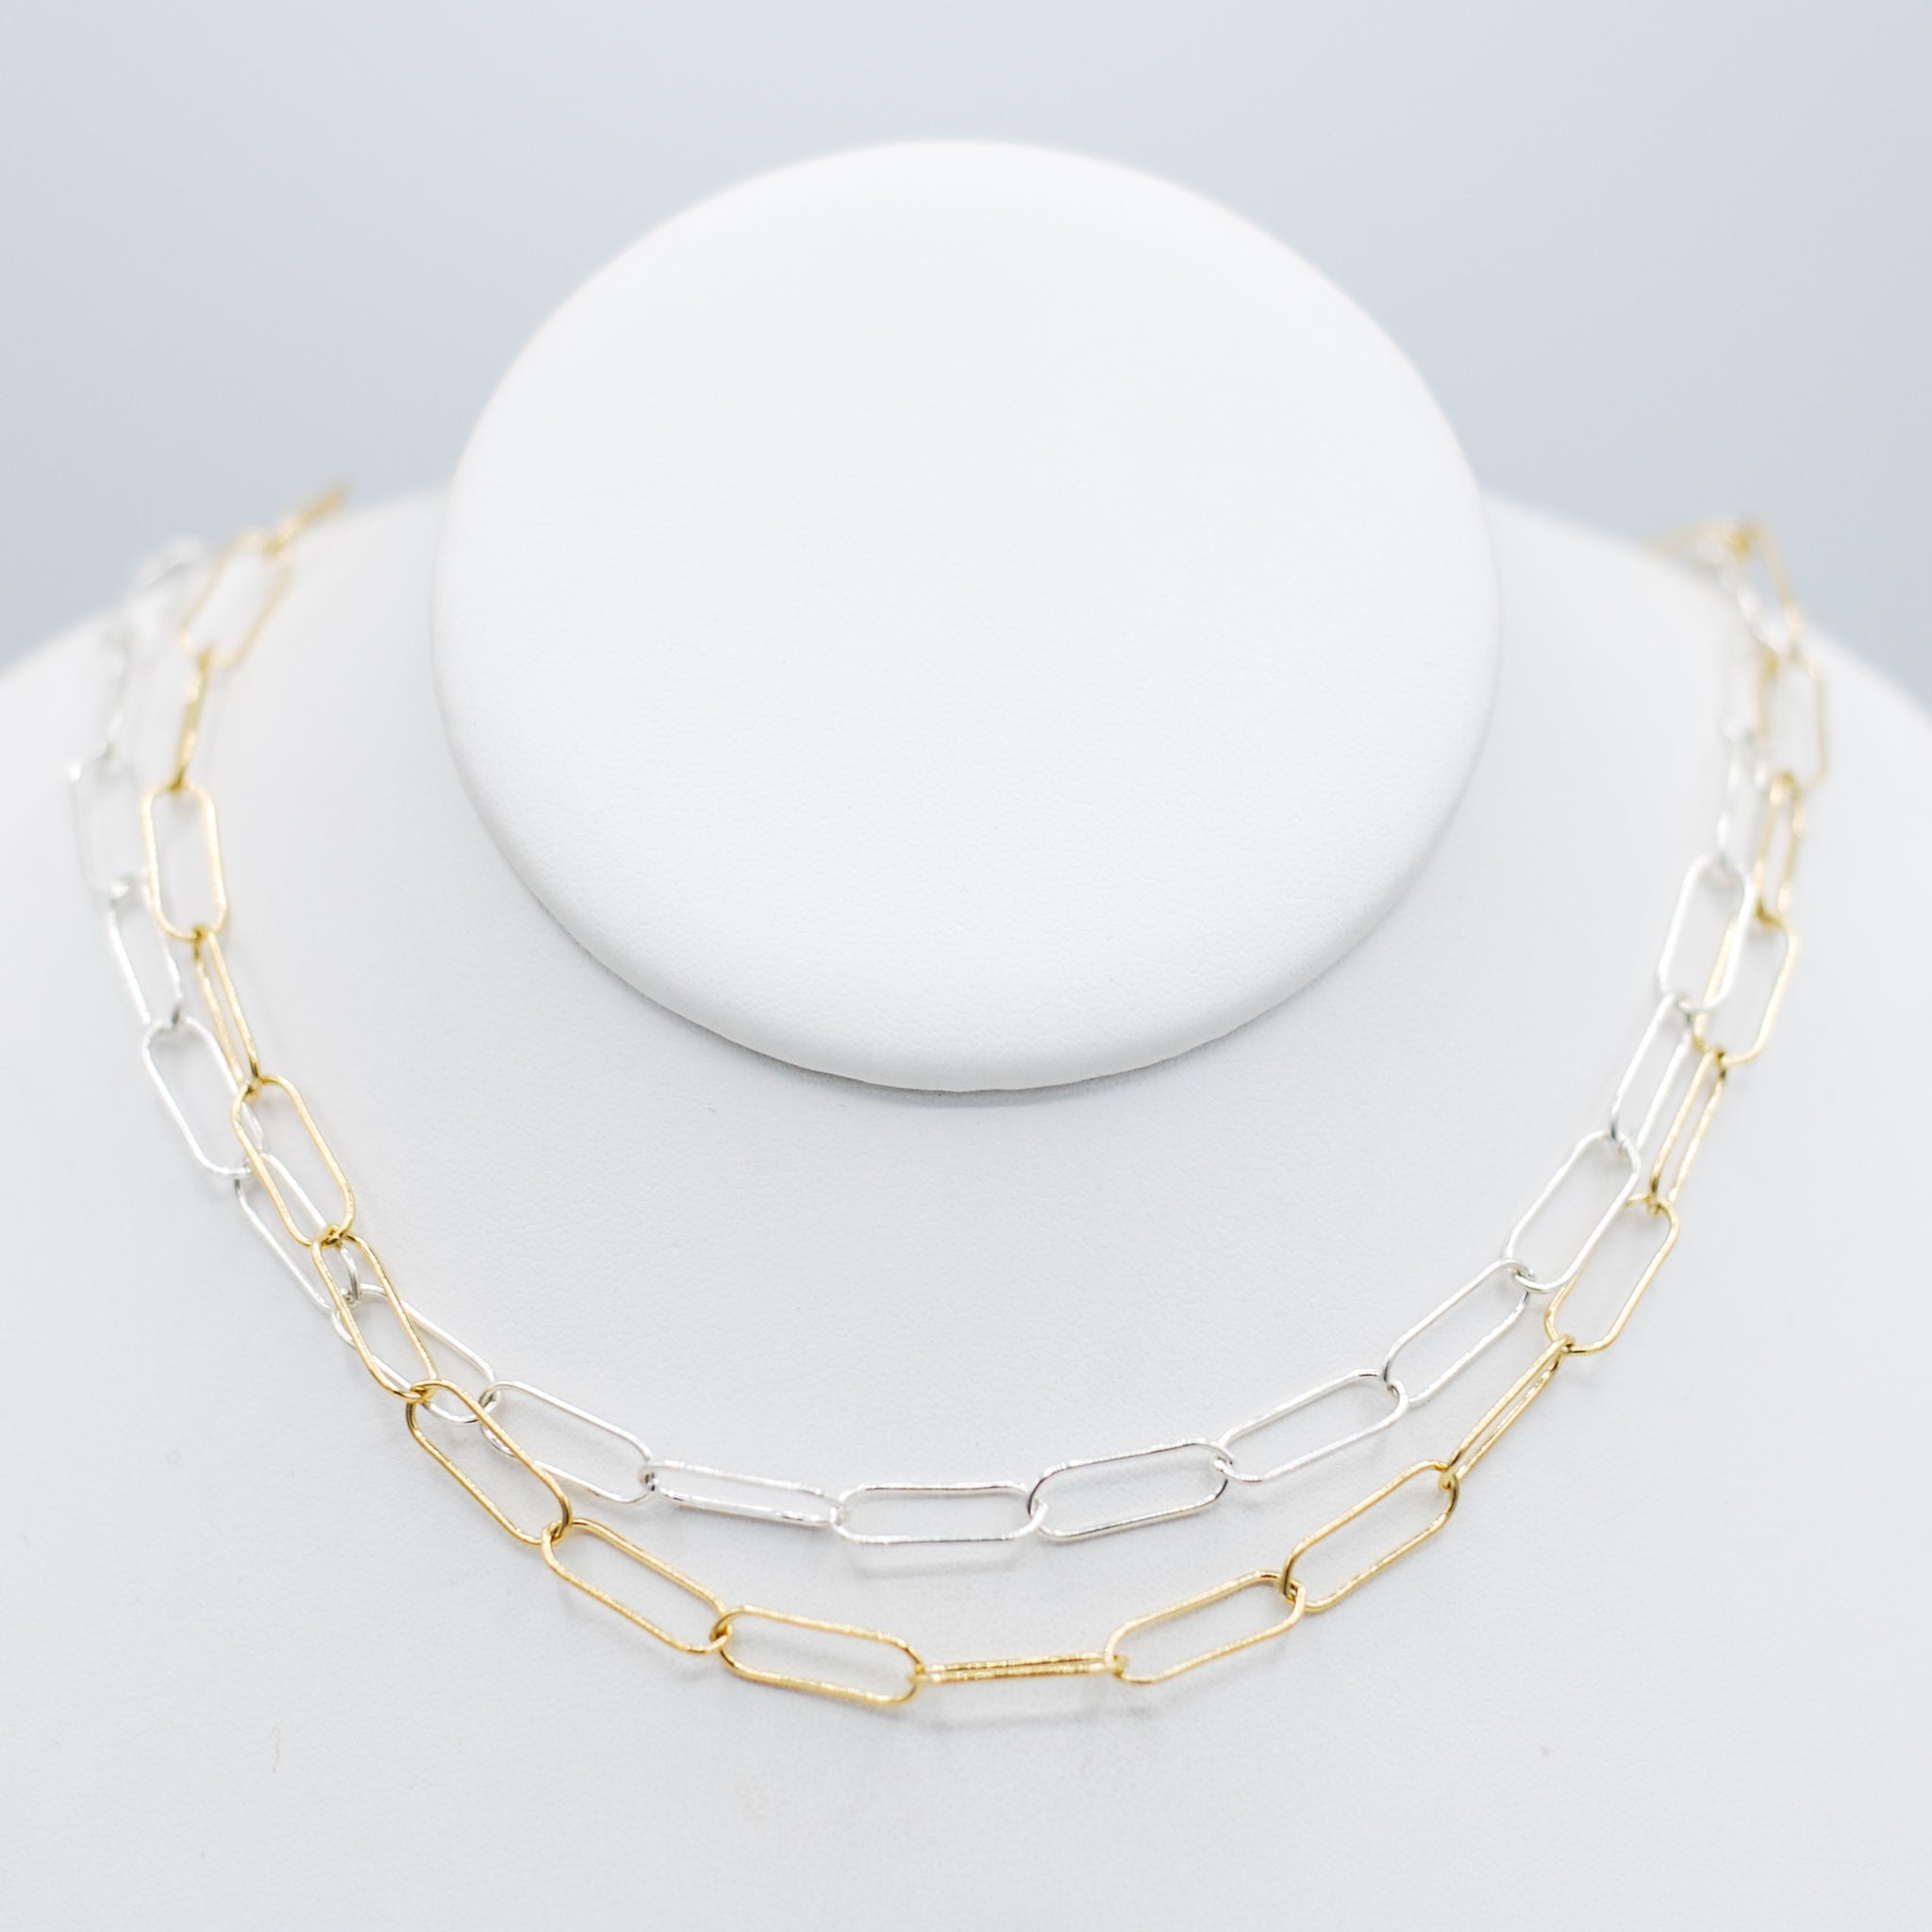 Layered Necklace Set, Set of 3, 14k Gold Filled, Sterling Silver,  Minimalist, Paperclip, Chain, Necklace, Gold, Silver, Set, Bar, Coin, Disk